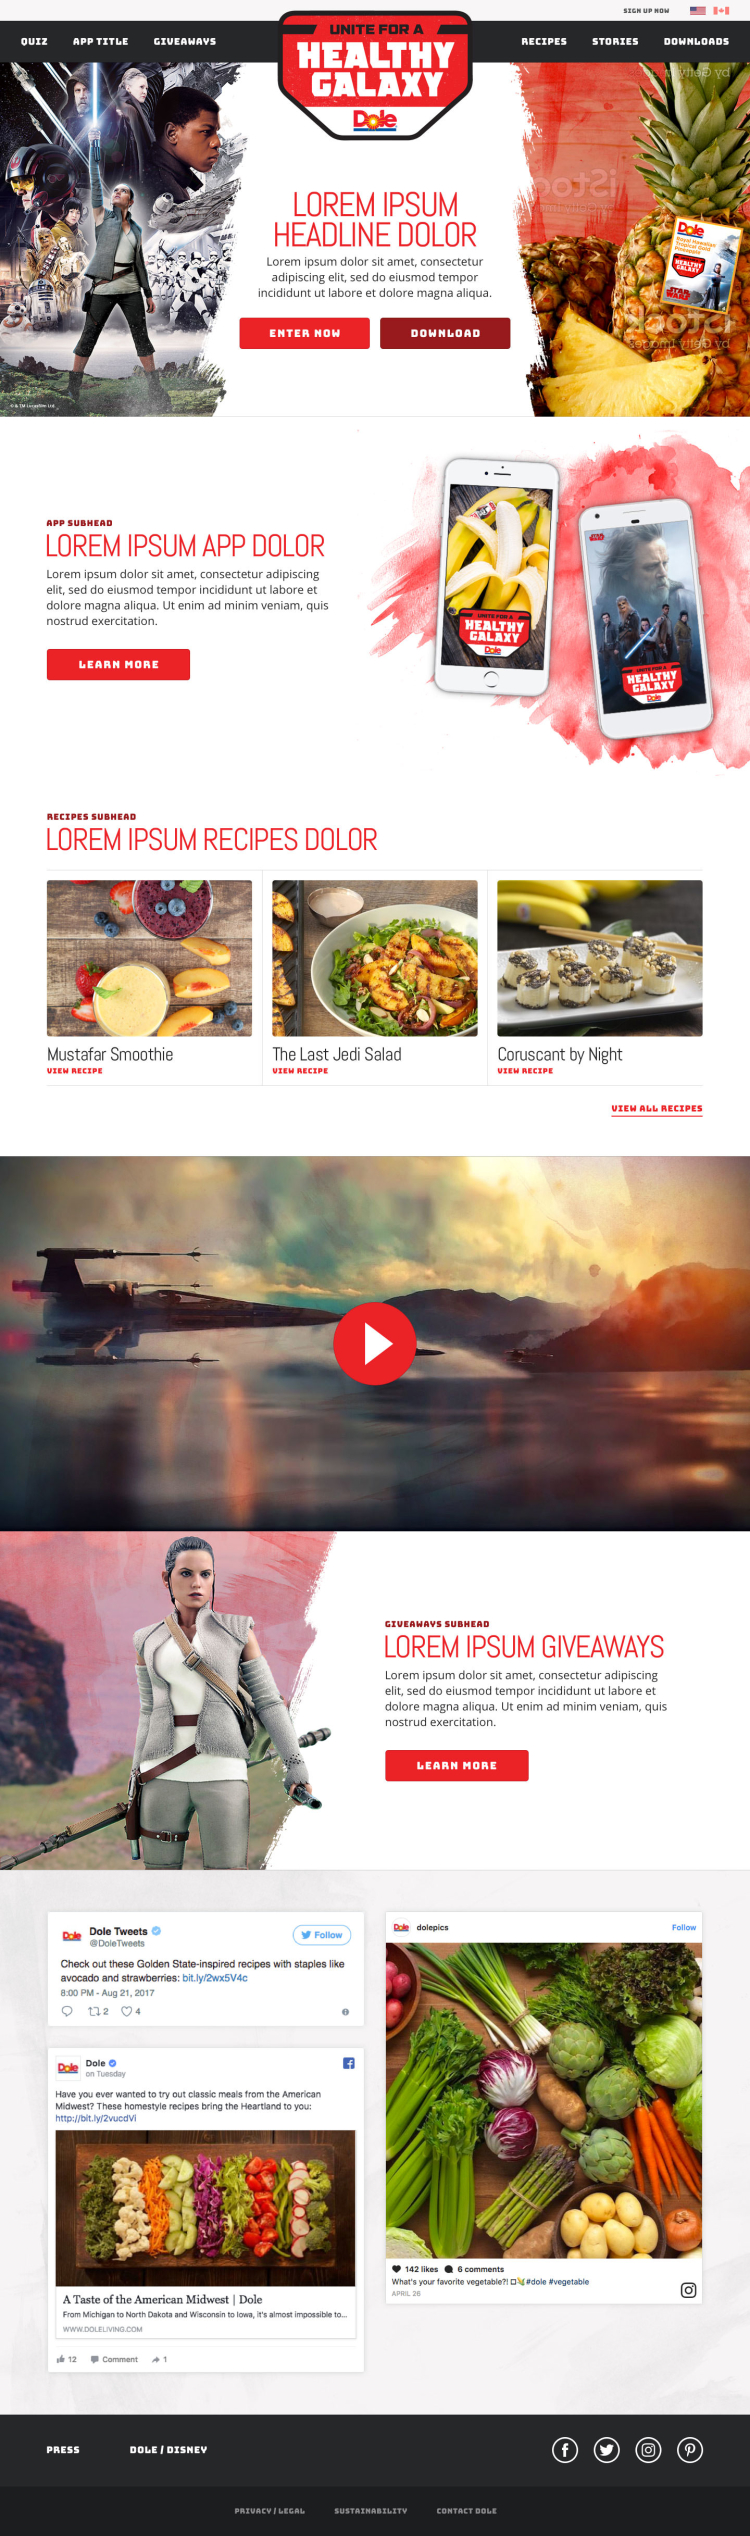 The Star Wars Episode VIII: The Last Jedi homepage design as part of the Dole/Disney partnership